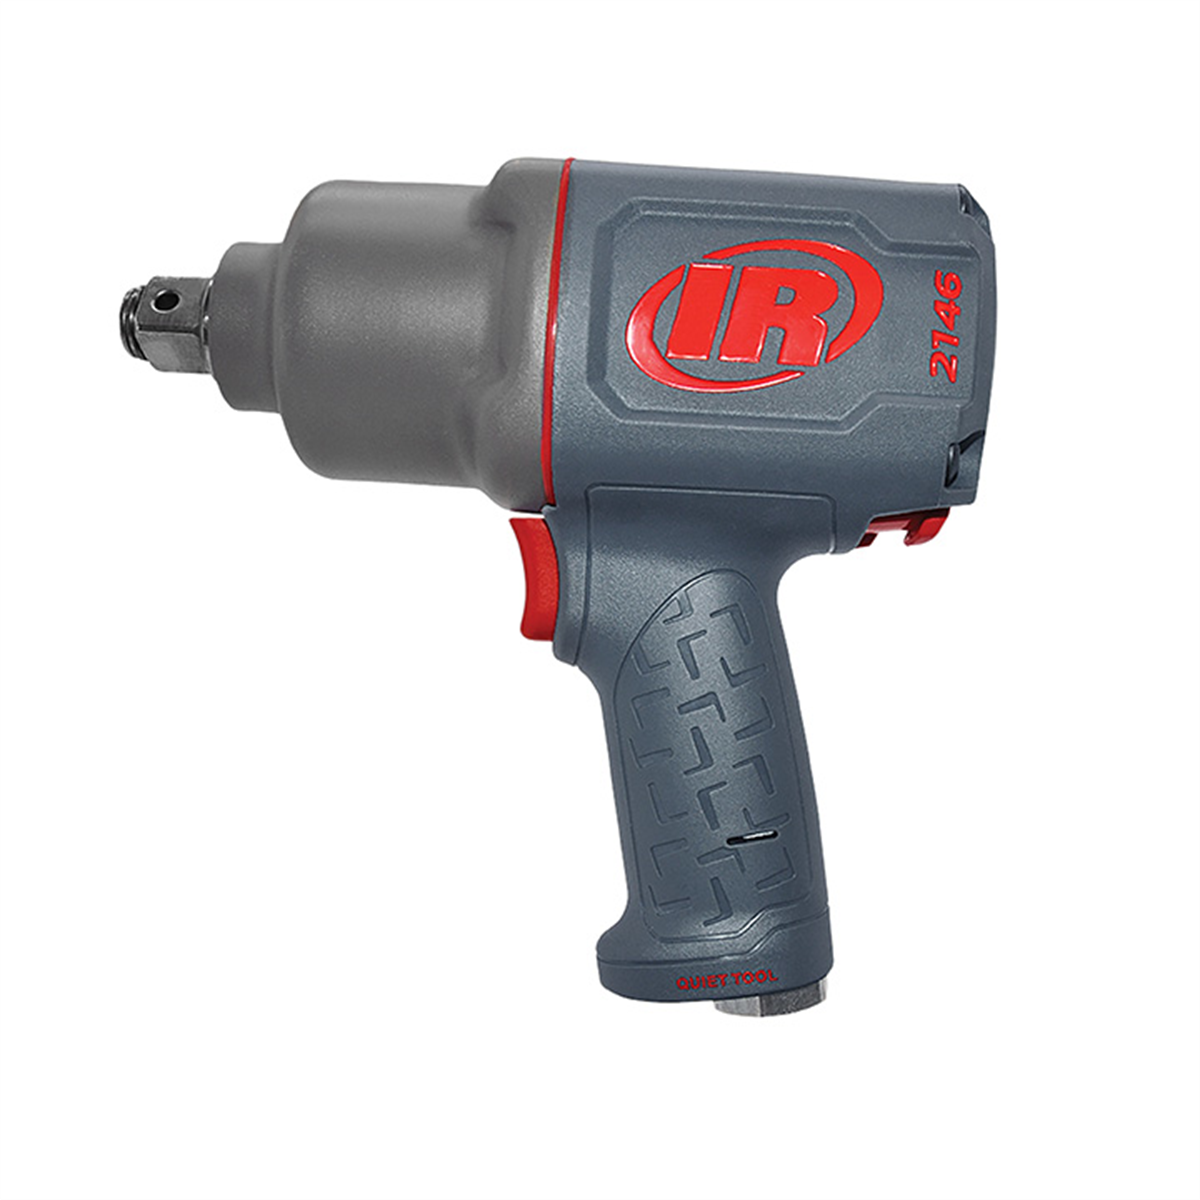 3/4" Air Impact Wrench, Quiet, 2,000 ft-lbs Nut-bu...